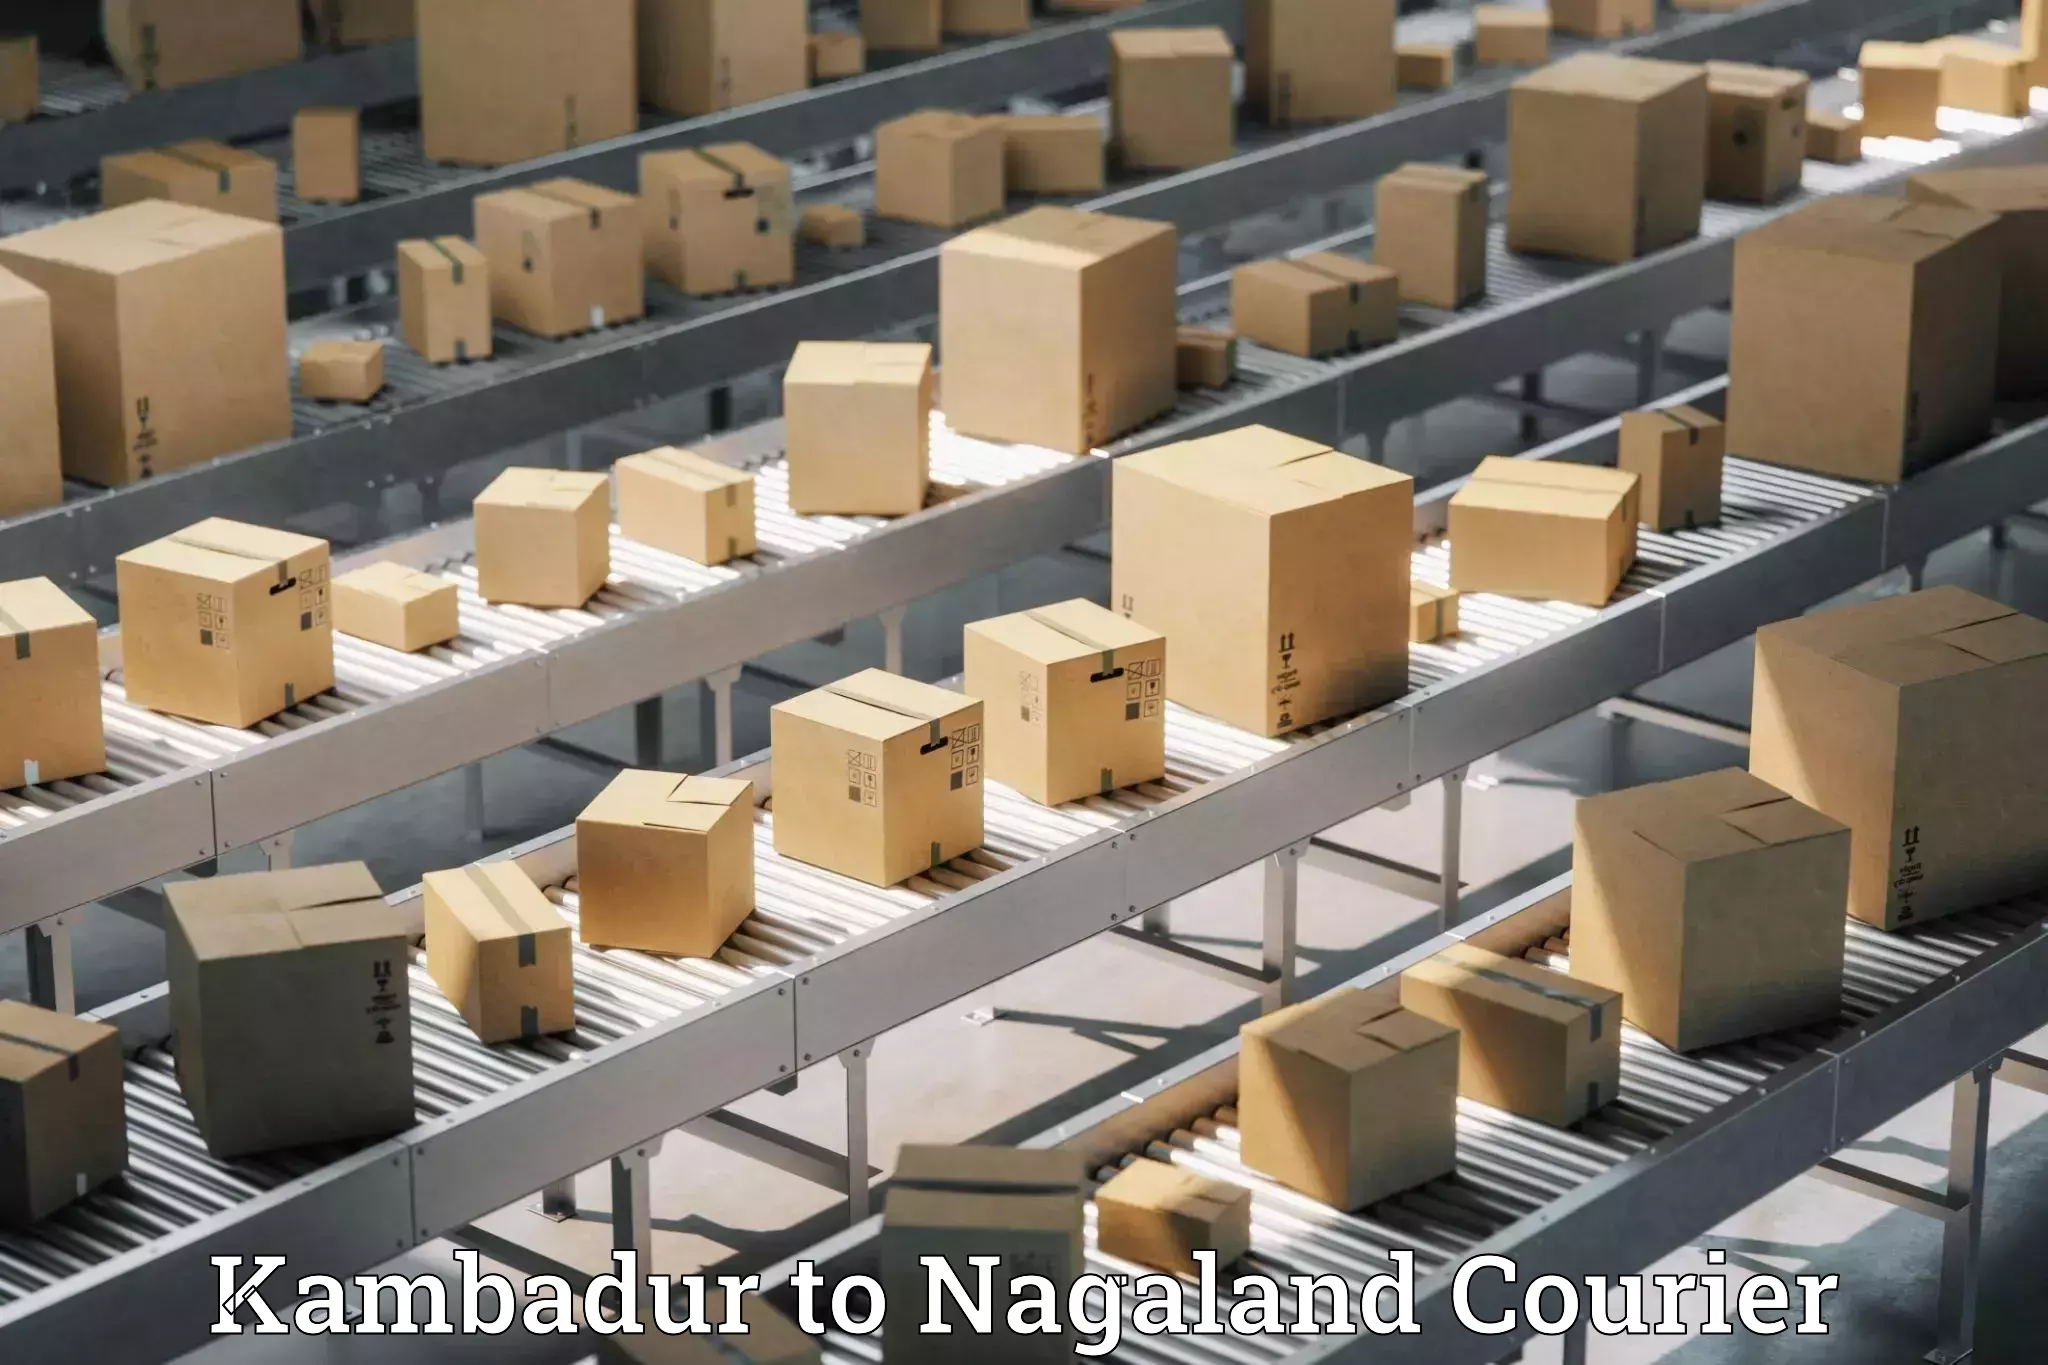 Corporate courier solutions Kambadur to Nagaland